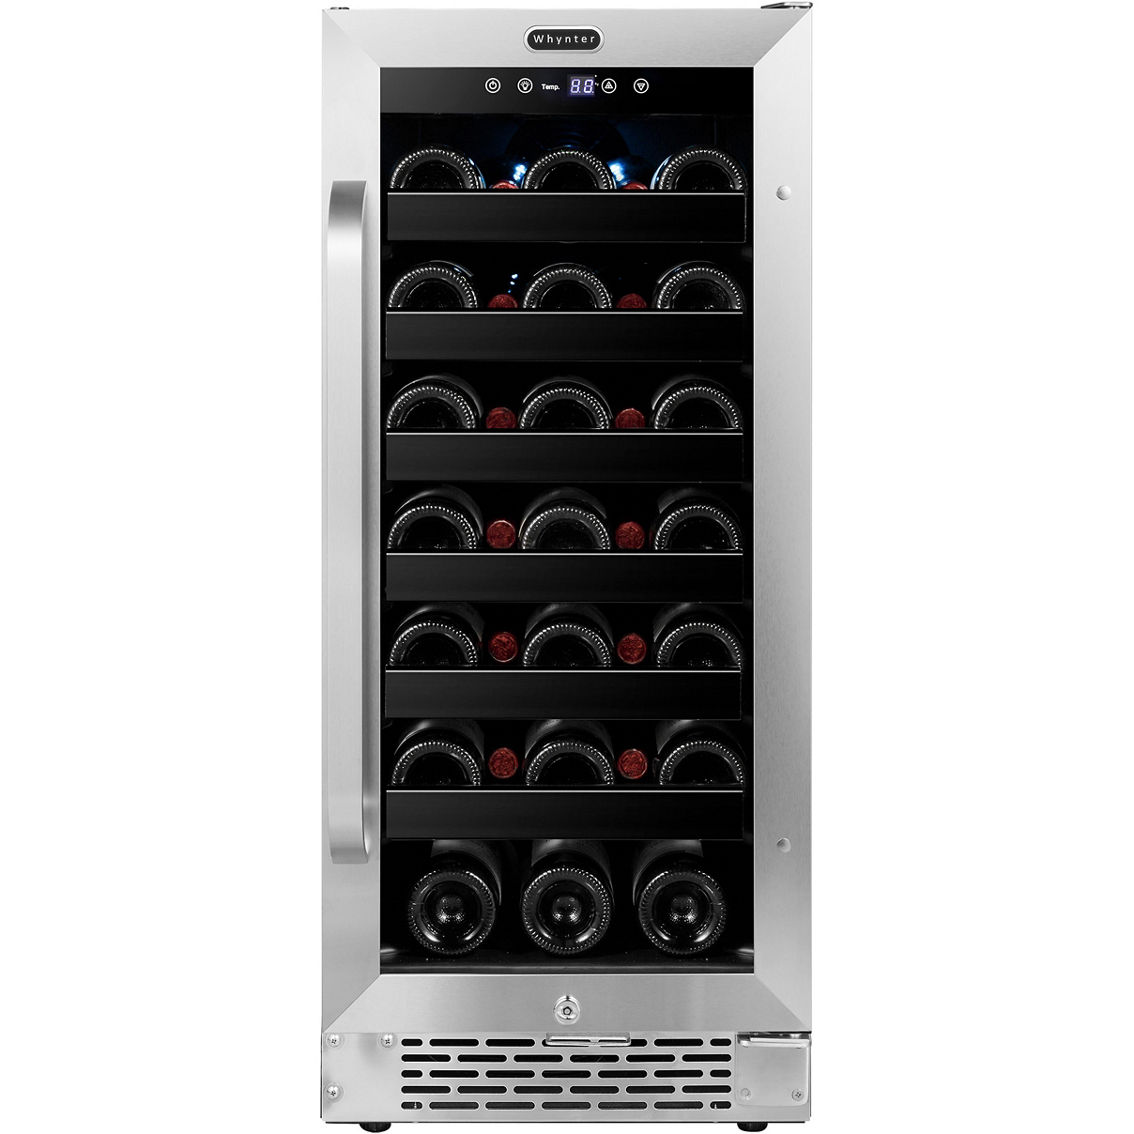 Whynter 15 in. 33 Bottle Undercounter Stainless Steel Wine Refrigerator - Image 2 of 10